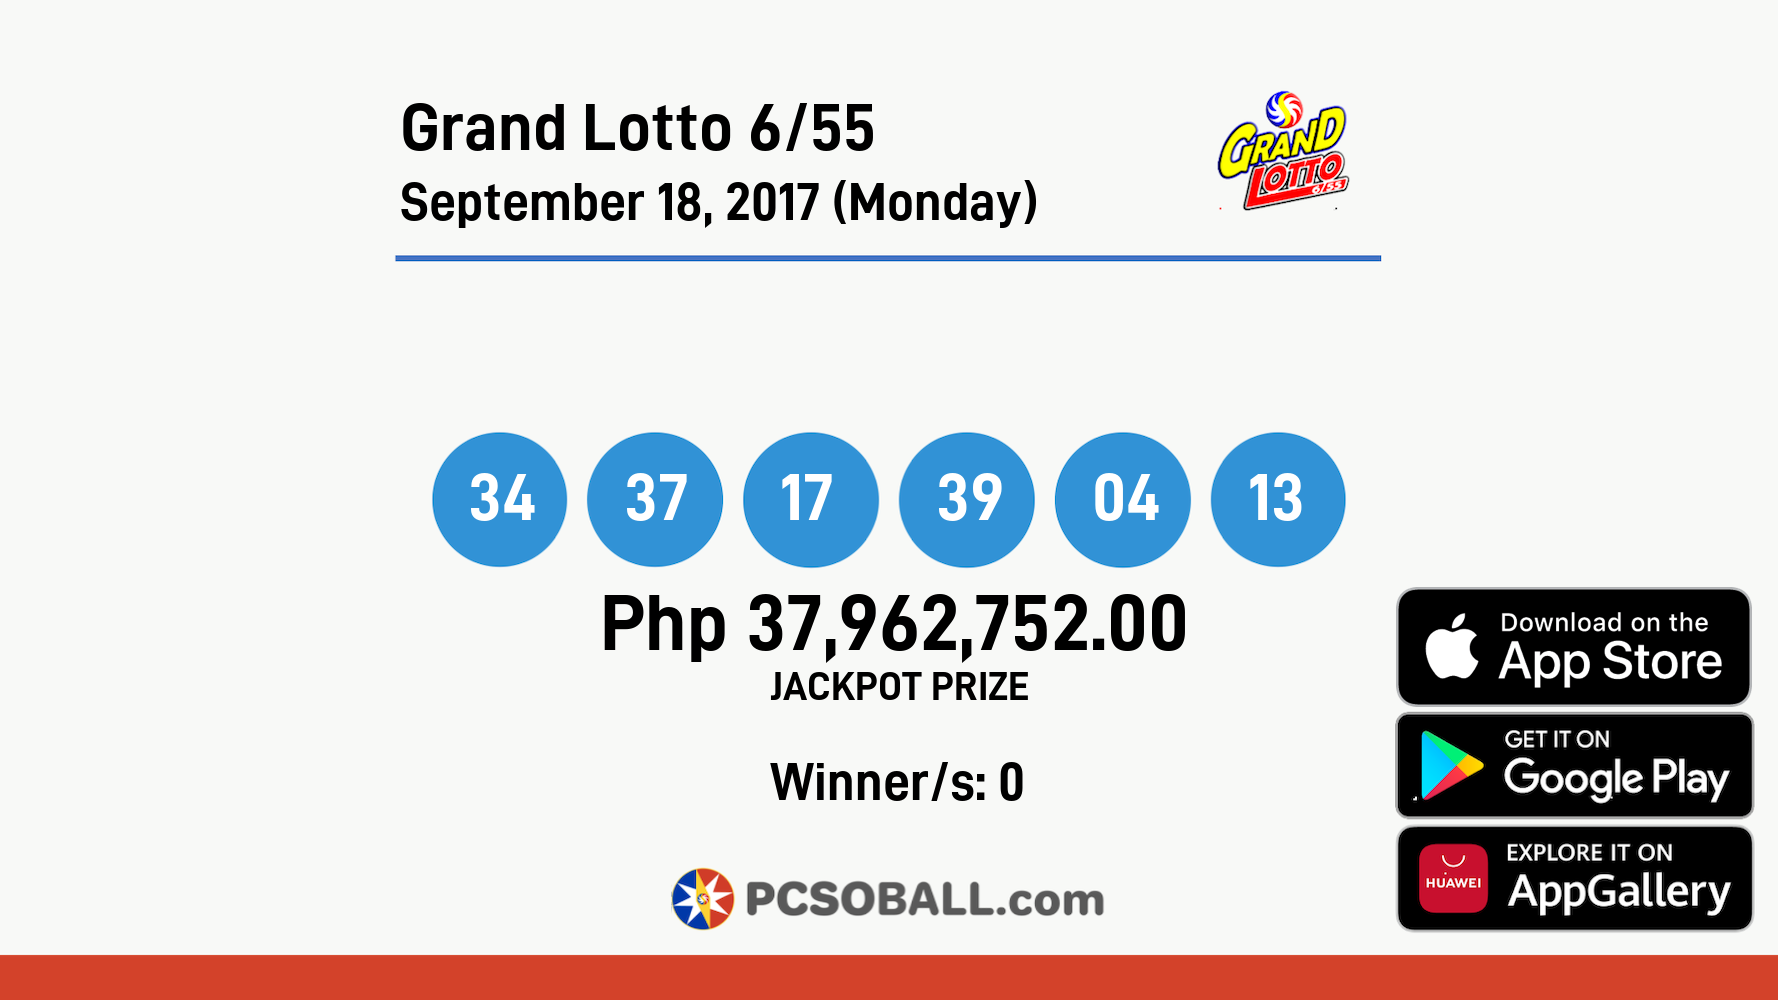 Grand Lotto 6/55 September 18, 2017 (Monday) Result